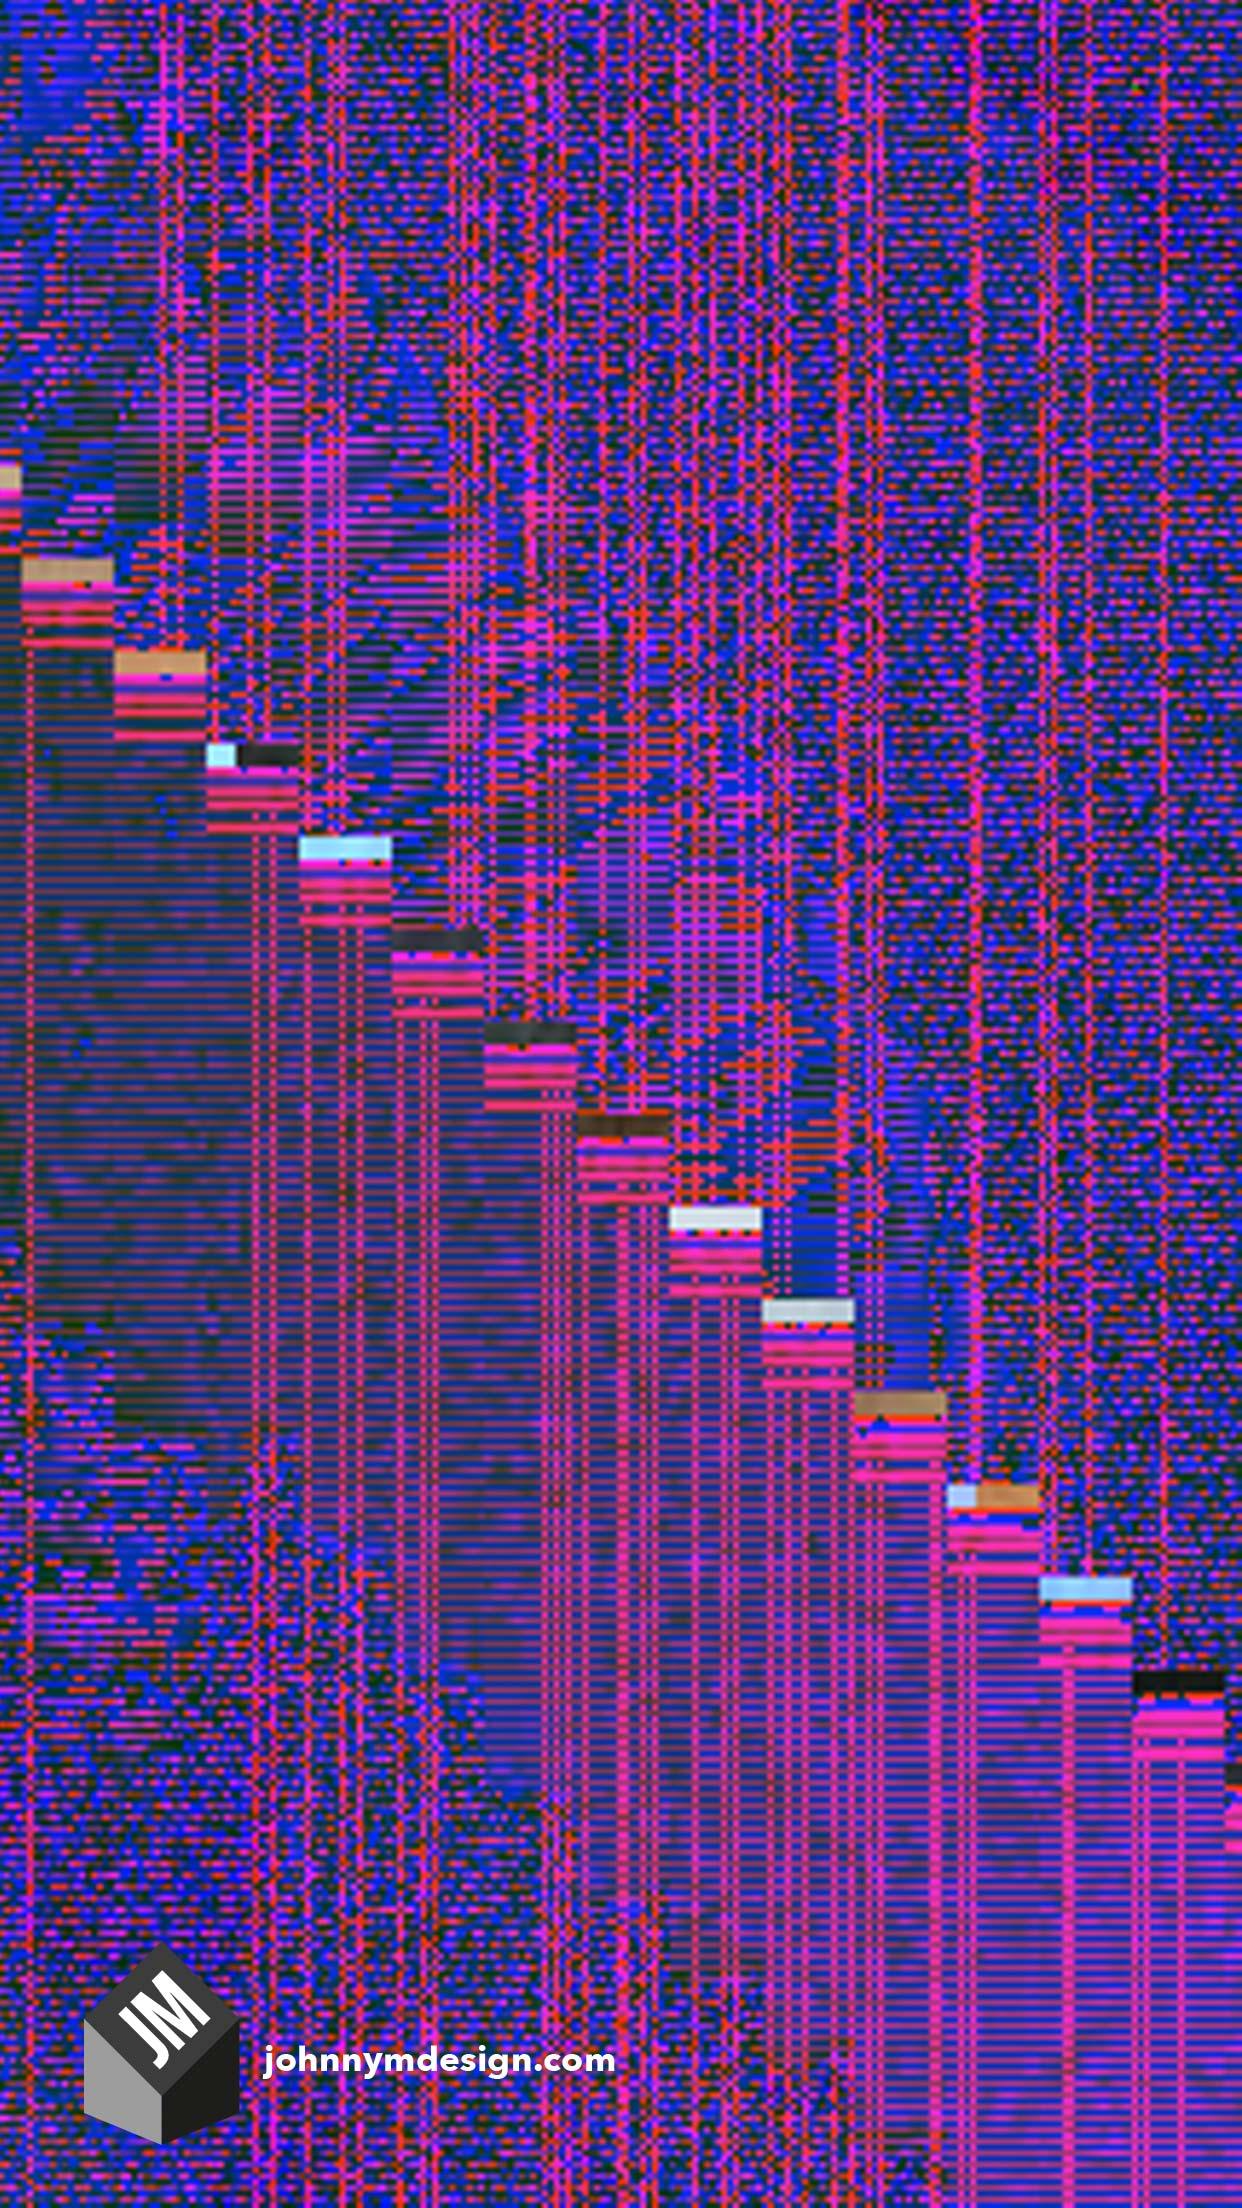 Premium Photo  Old tv screen errorgame over digital pixel noise abstract  design photo glitch the tv signal is not working technical problems grunge  wallpaper data decomposition monitoring a technical problem